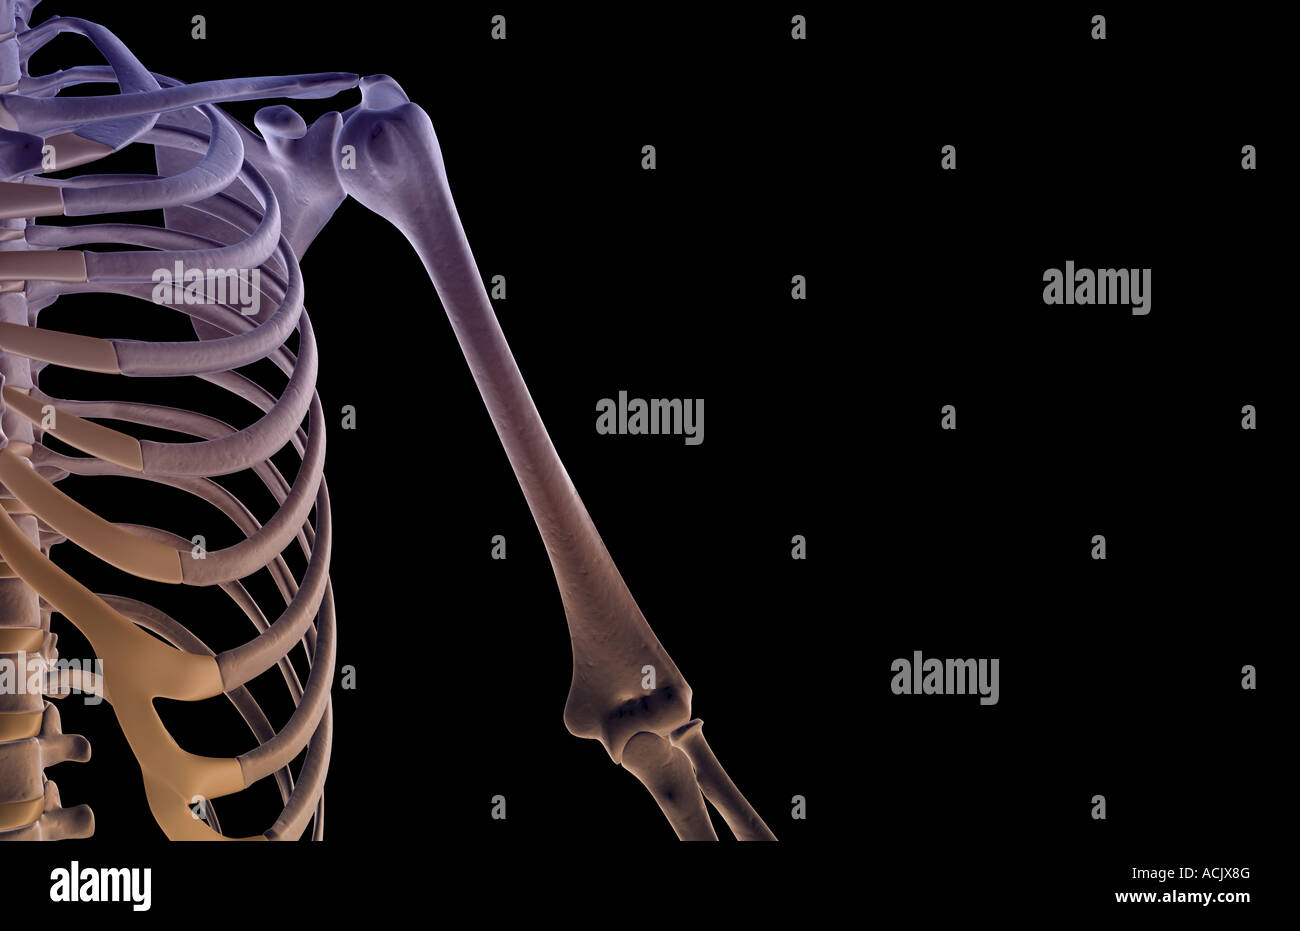 Upper Arm Bone High Resolution Stock Photography and Images - Alamy